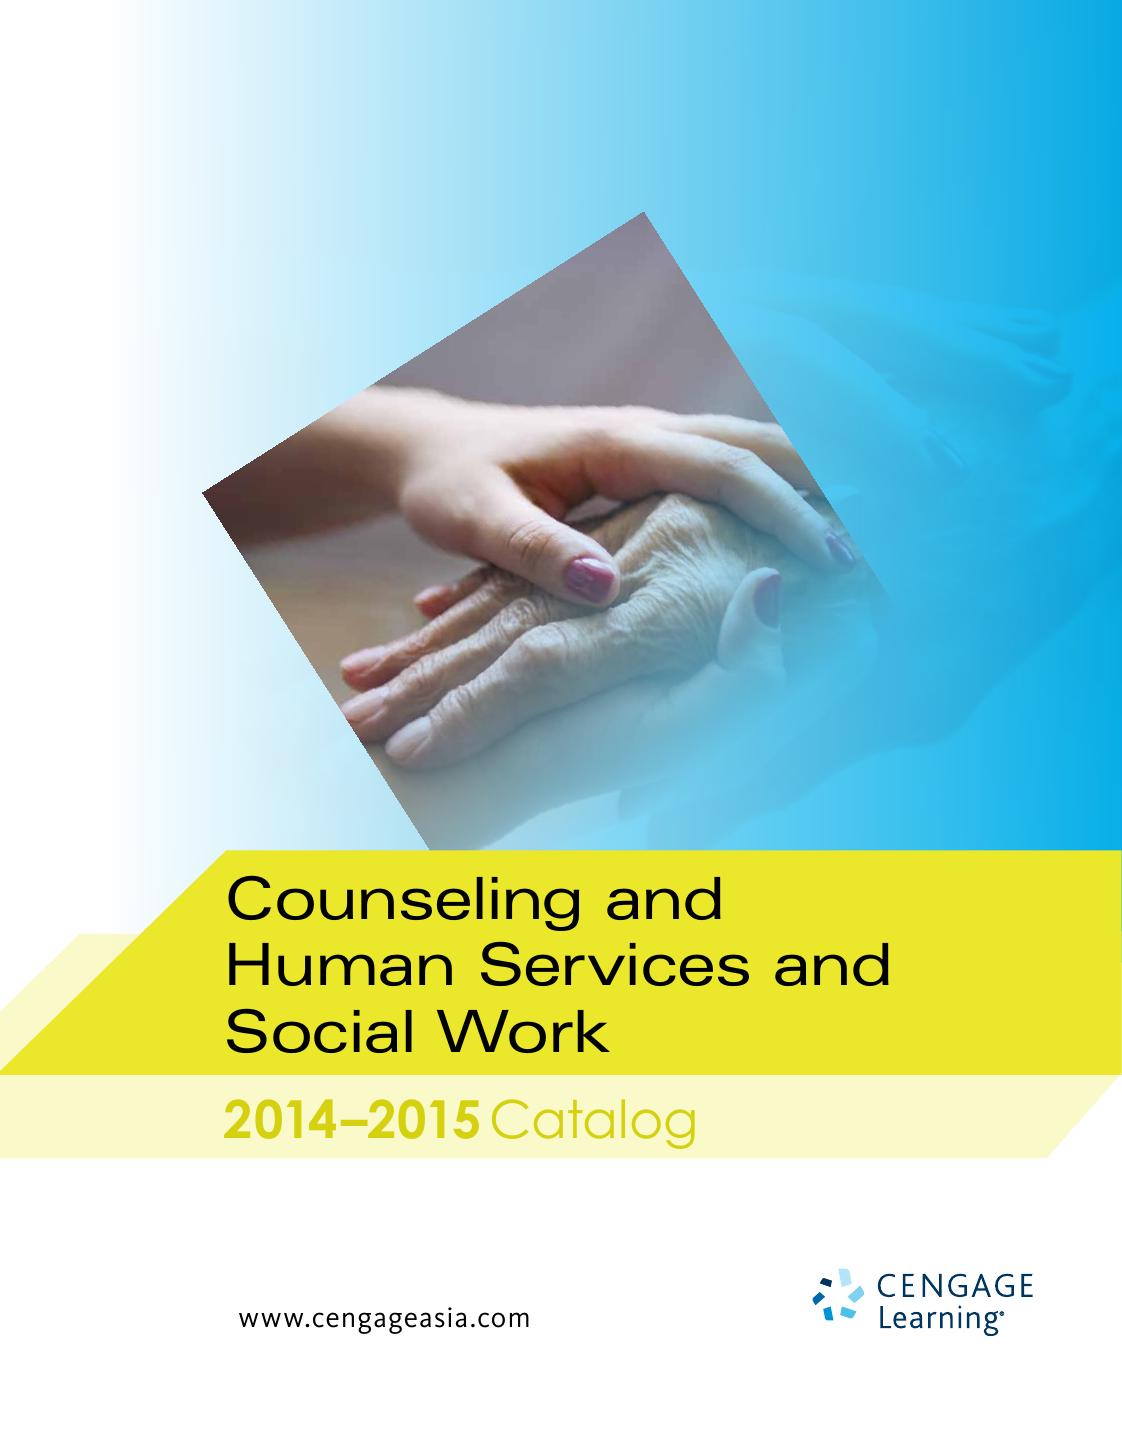 Counseling, Human Services, and Social Work 2015